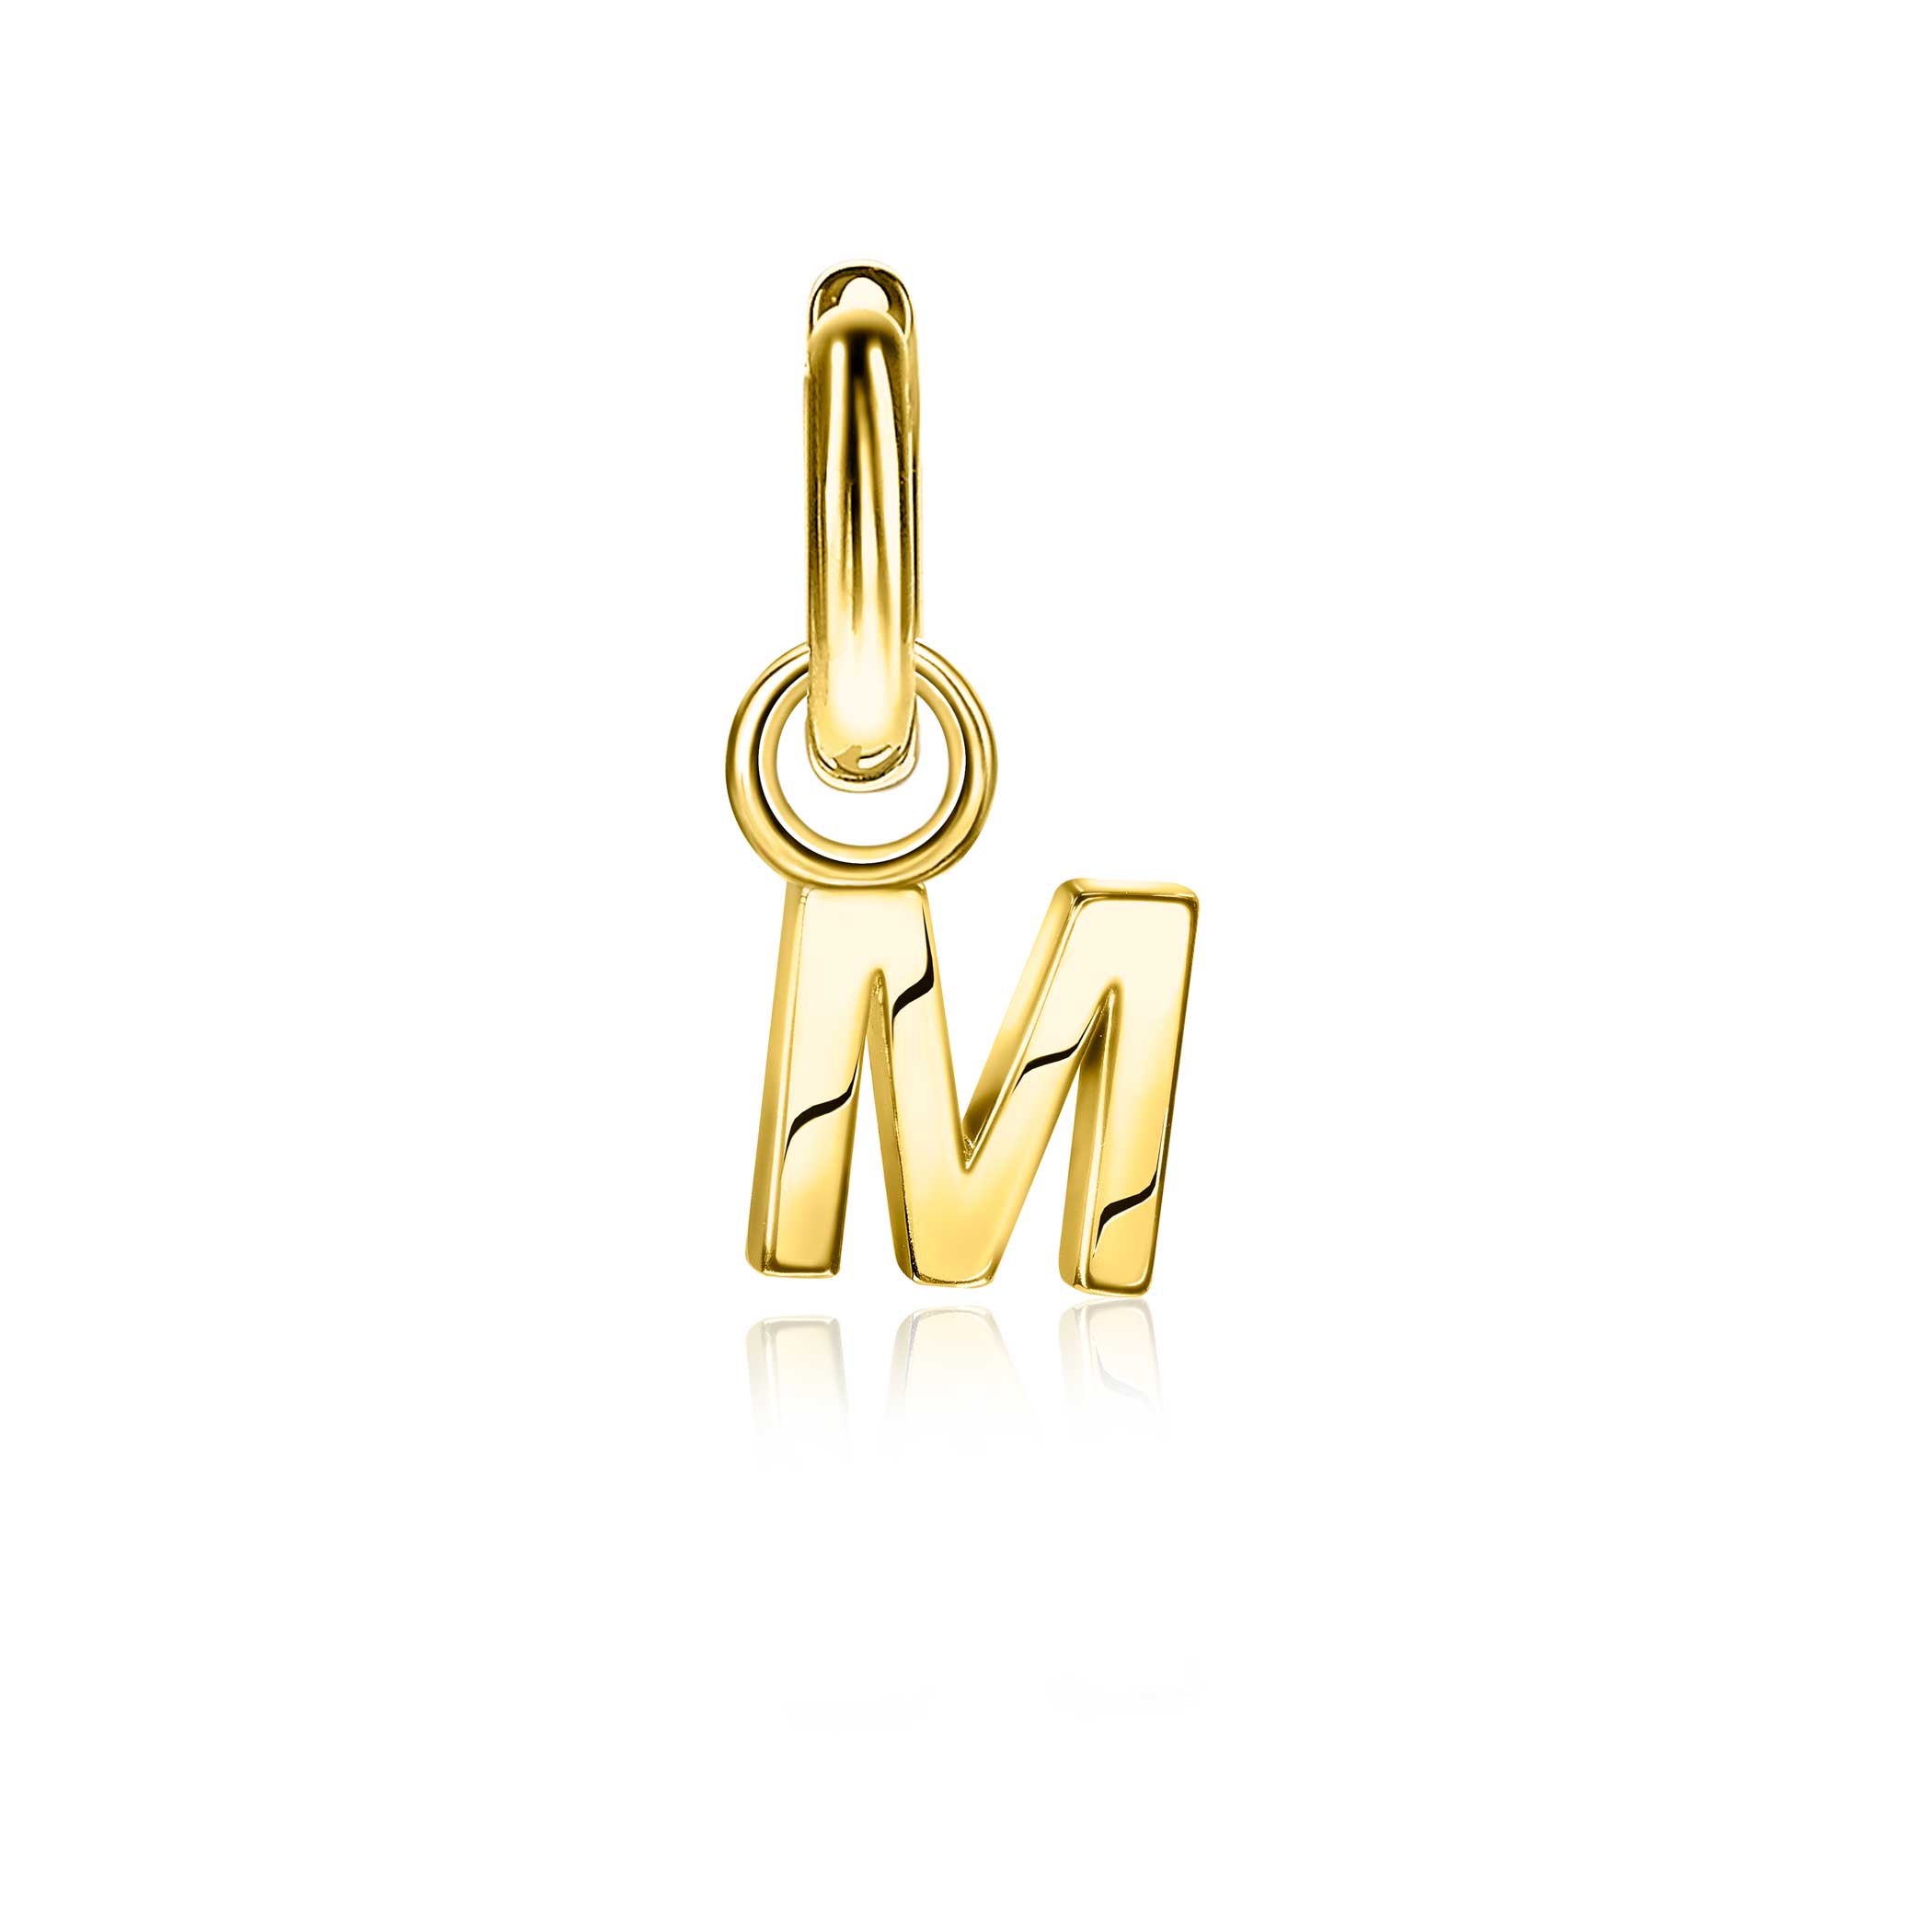 ZINZI Gold Plated Letter Earrings Pendant M price per piece ZICH2145M (excl. hoop earrings)